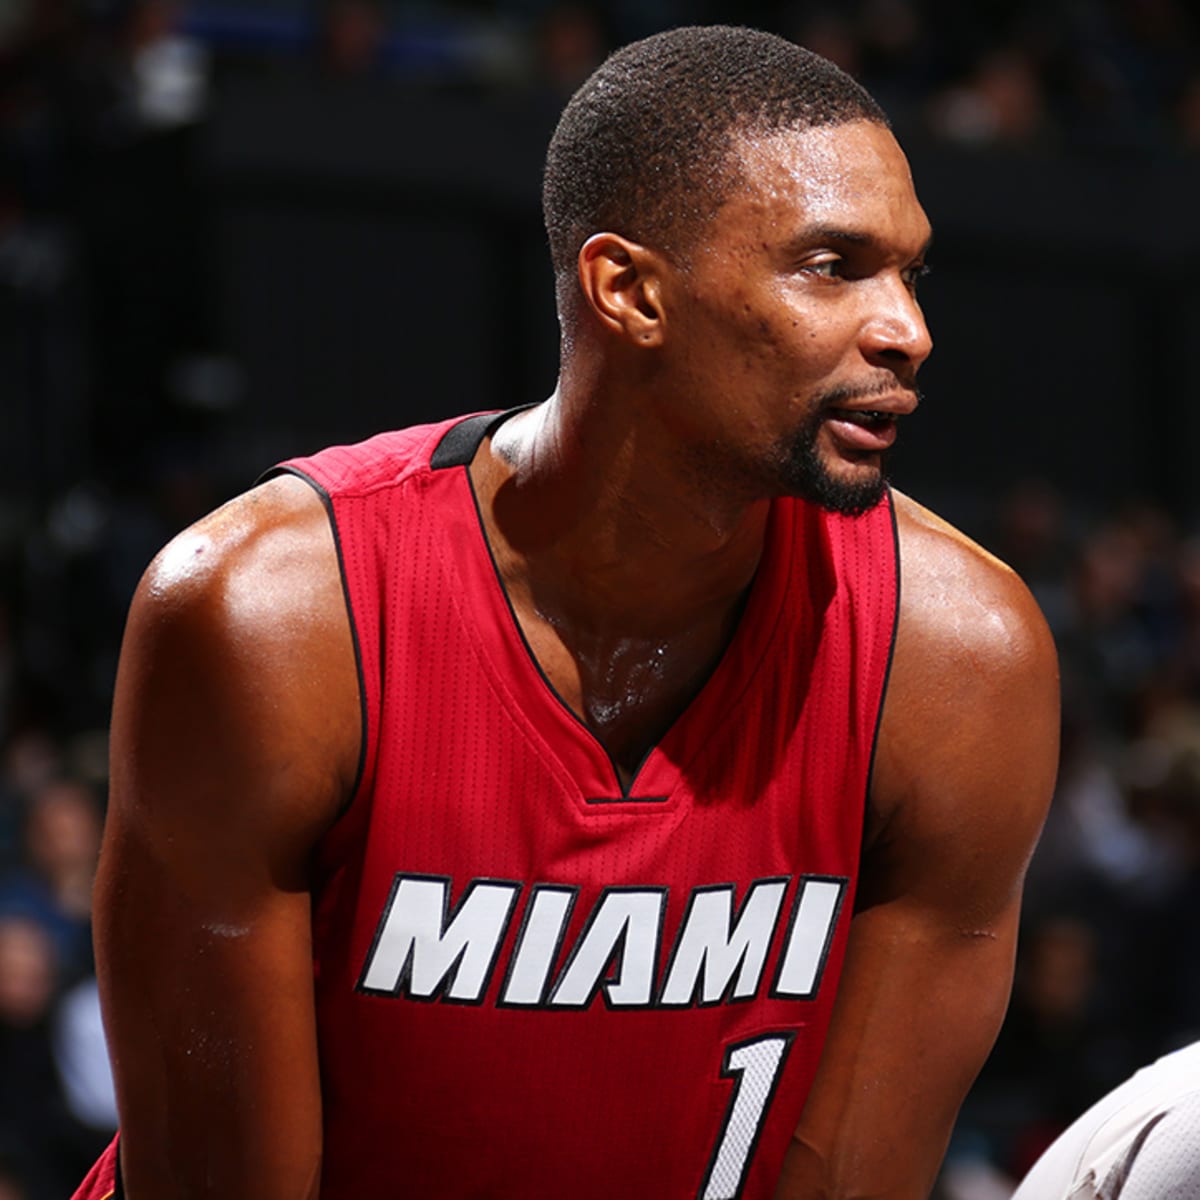 Chris Bosh fails physical with continued blood clotting - Sports